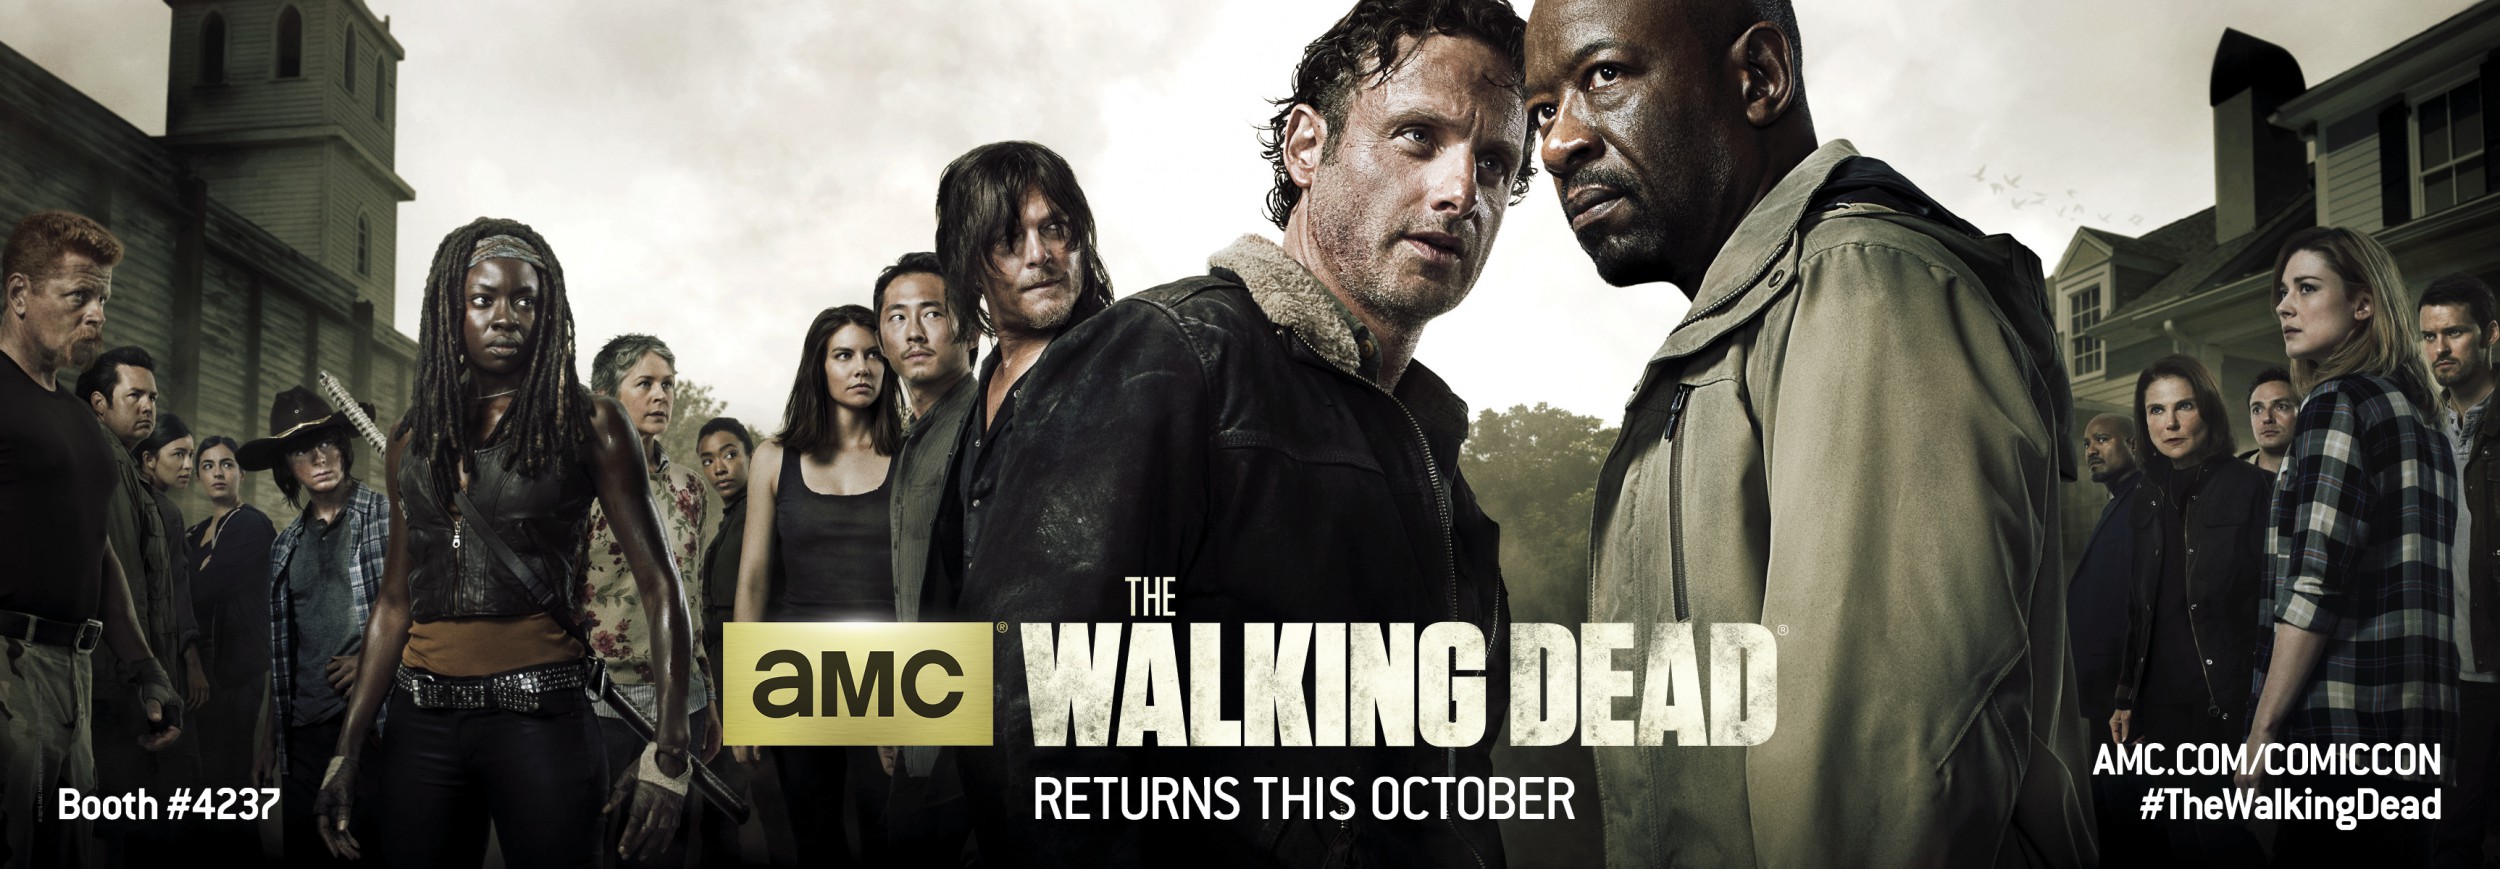 Mega Sized TV Poster Image for The Walking Dead (#40 of 67)